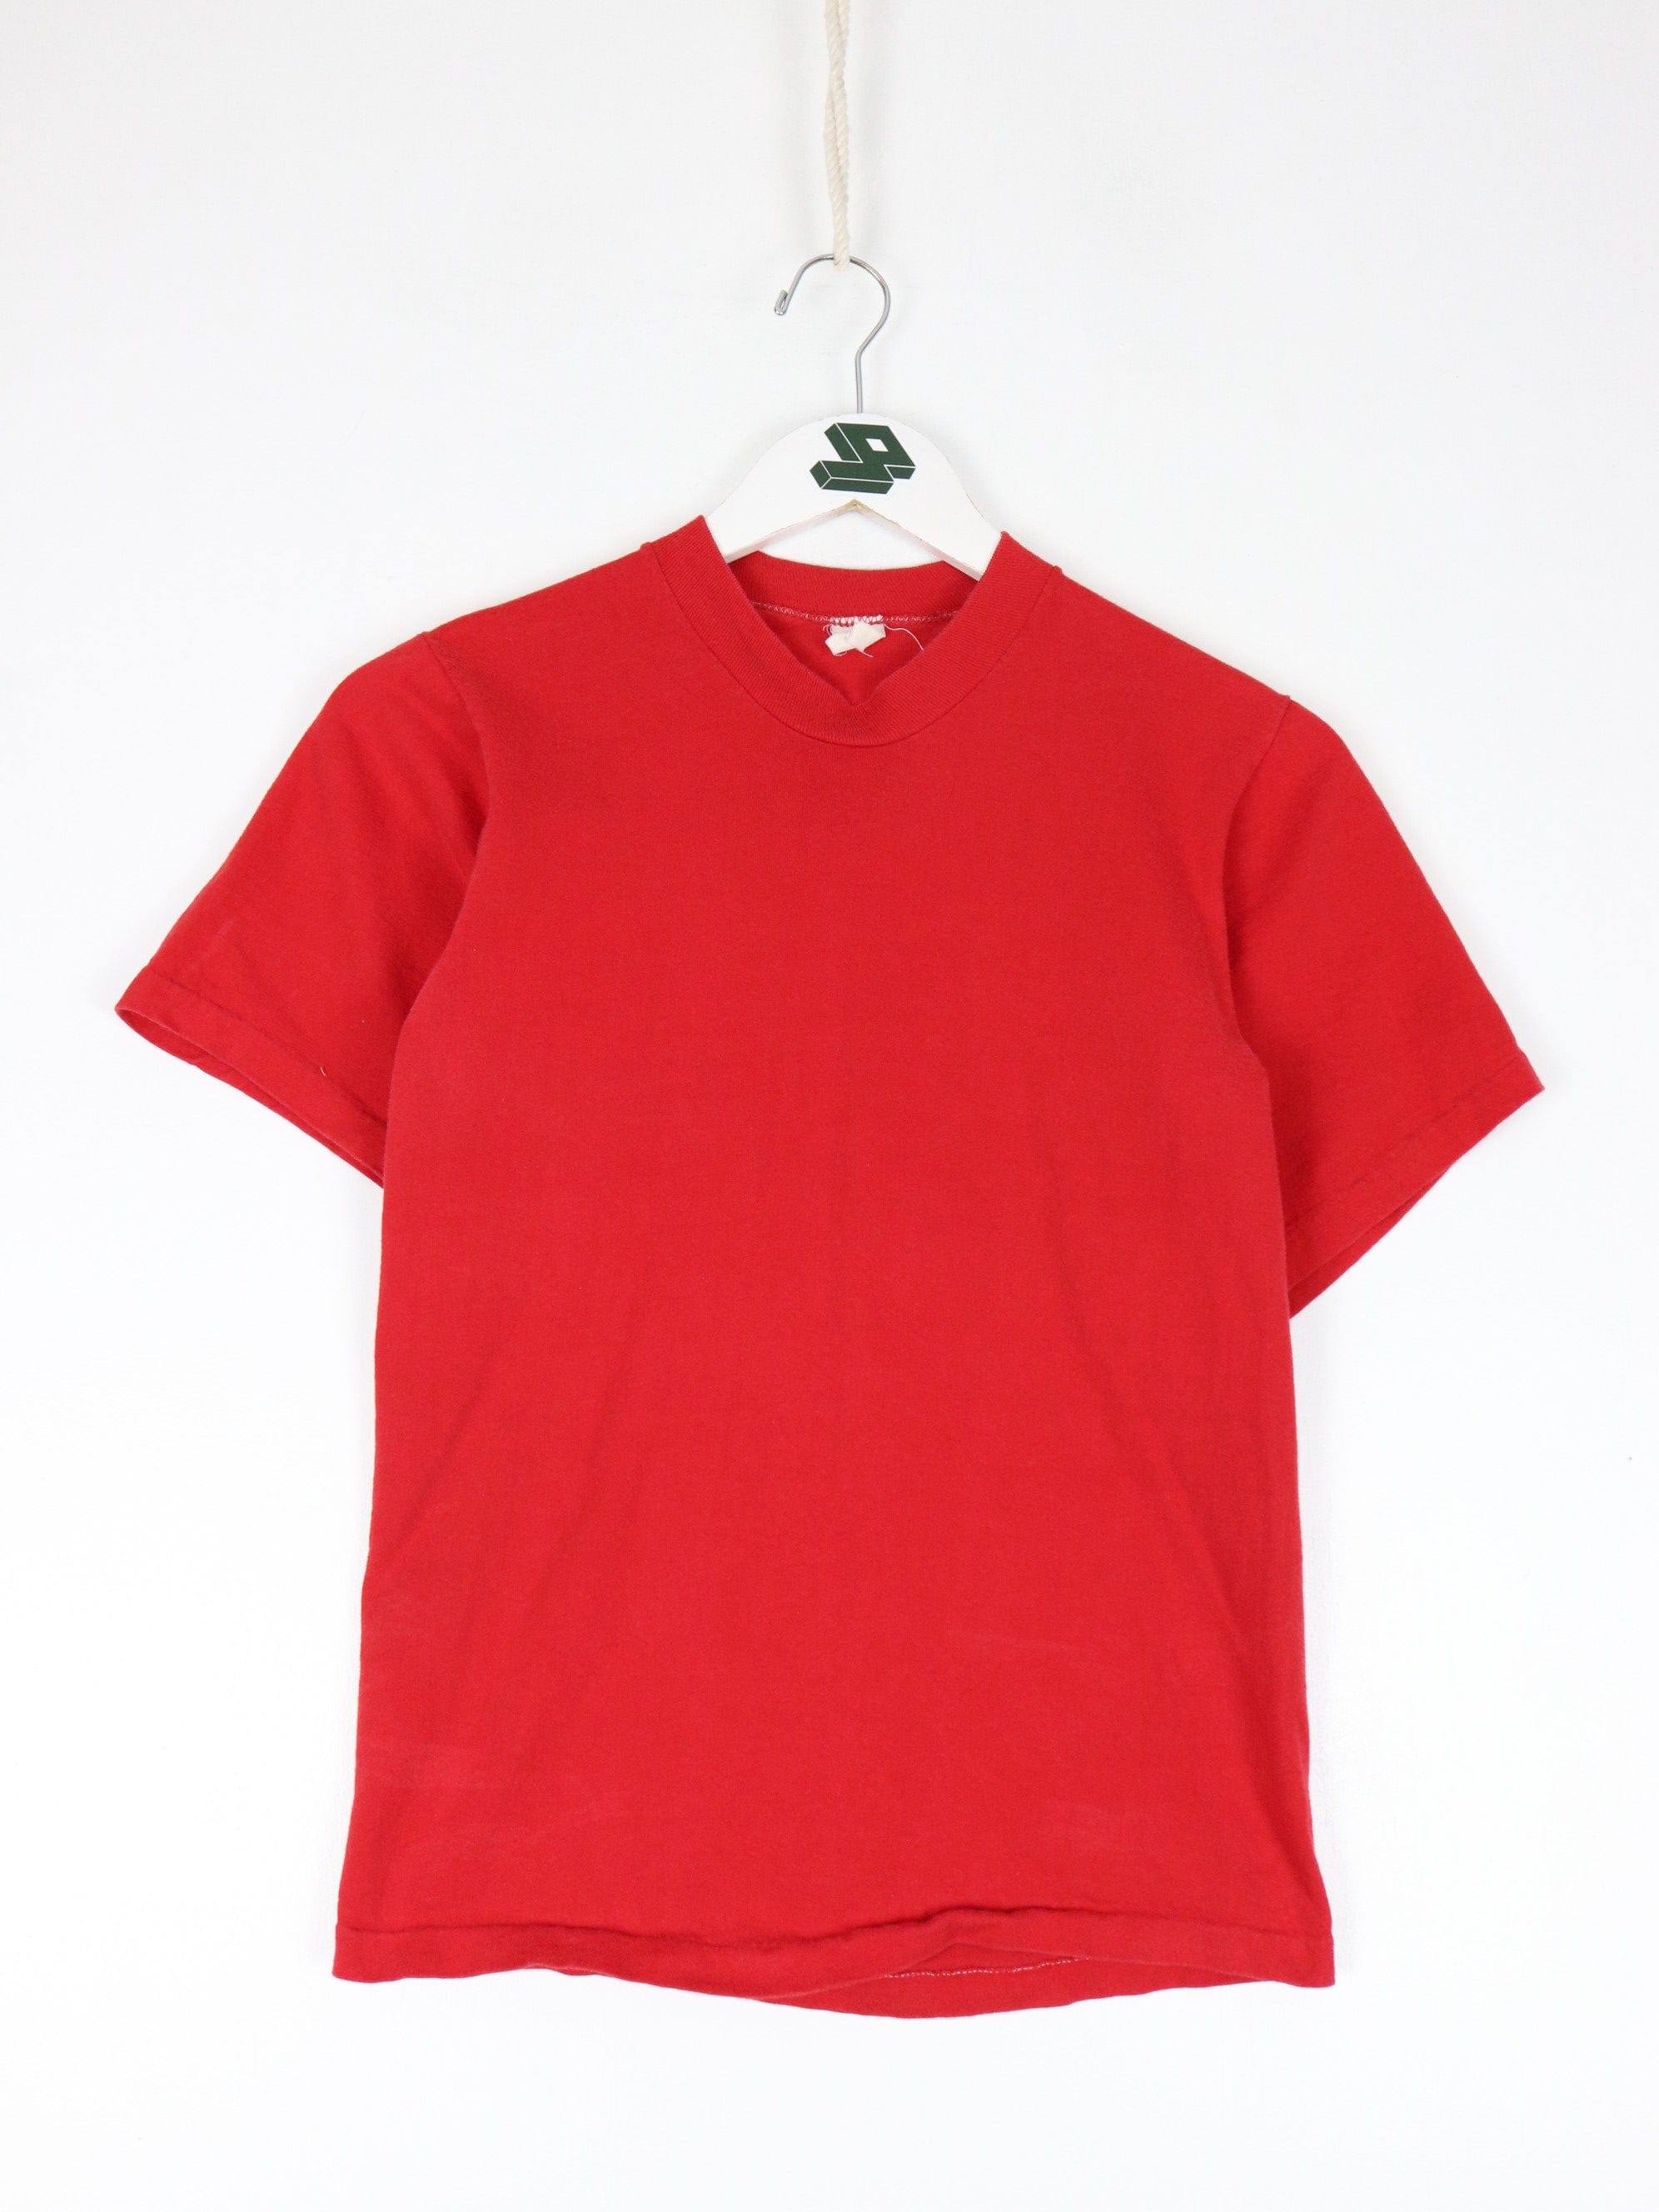 Vintage Sportswear T Shirt Youth Small Red 80s – Proper Vintage